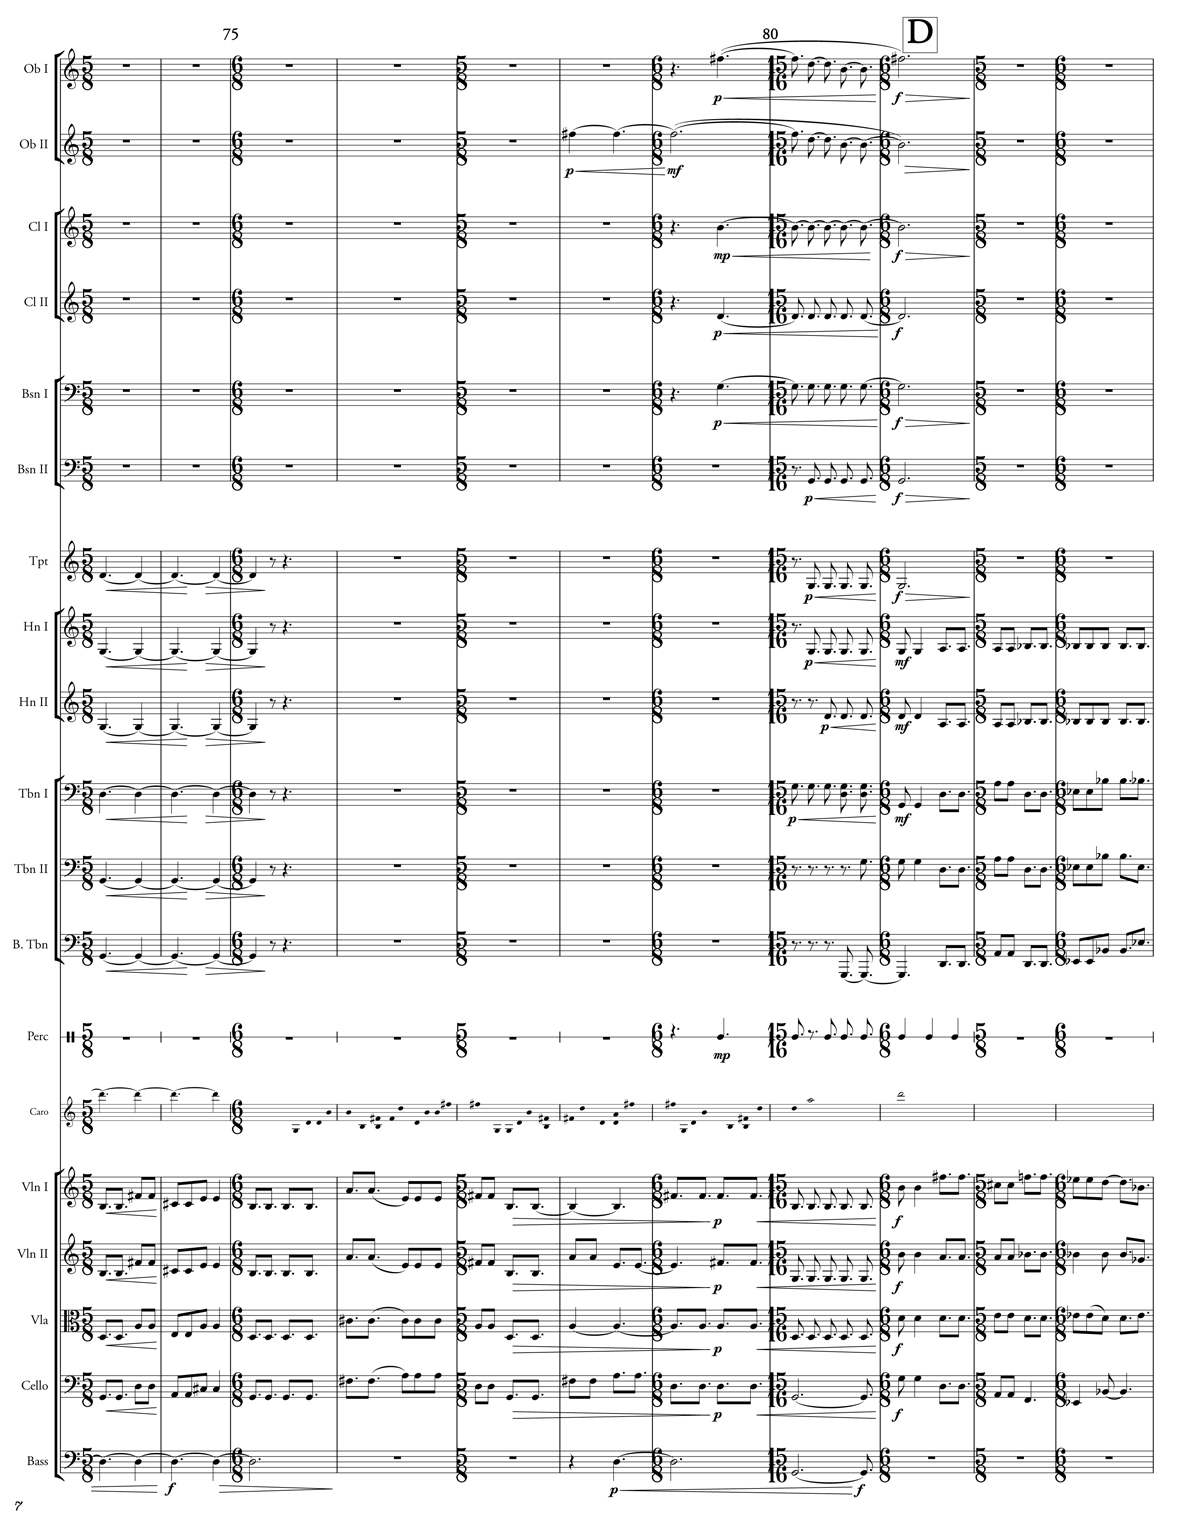 A passage from Caroline Shaw's orchestral score for Lo